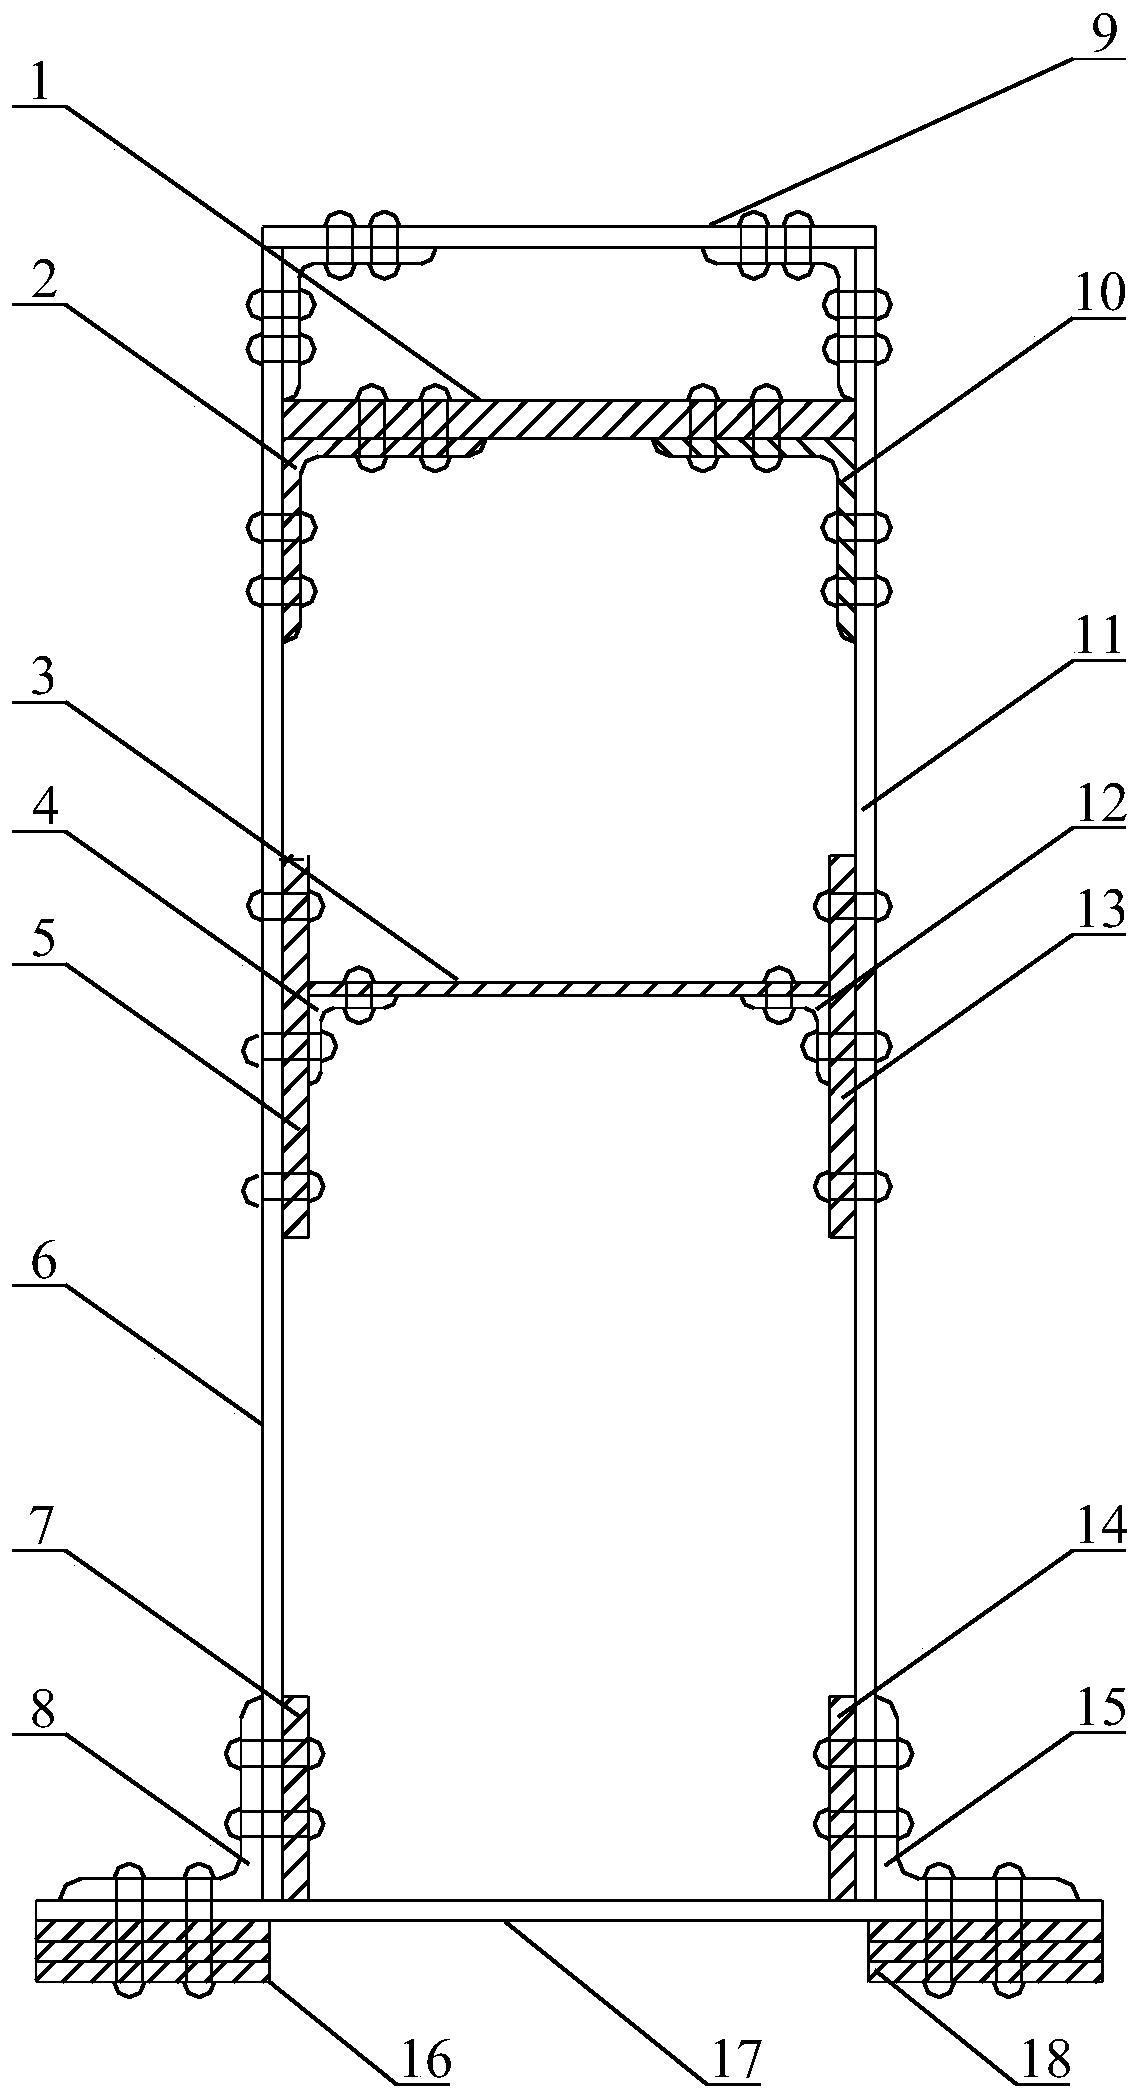 A method for reinforcing arch rib segments in steel structure arch bridges